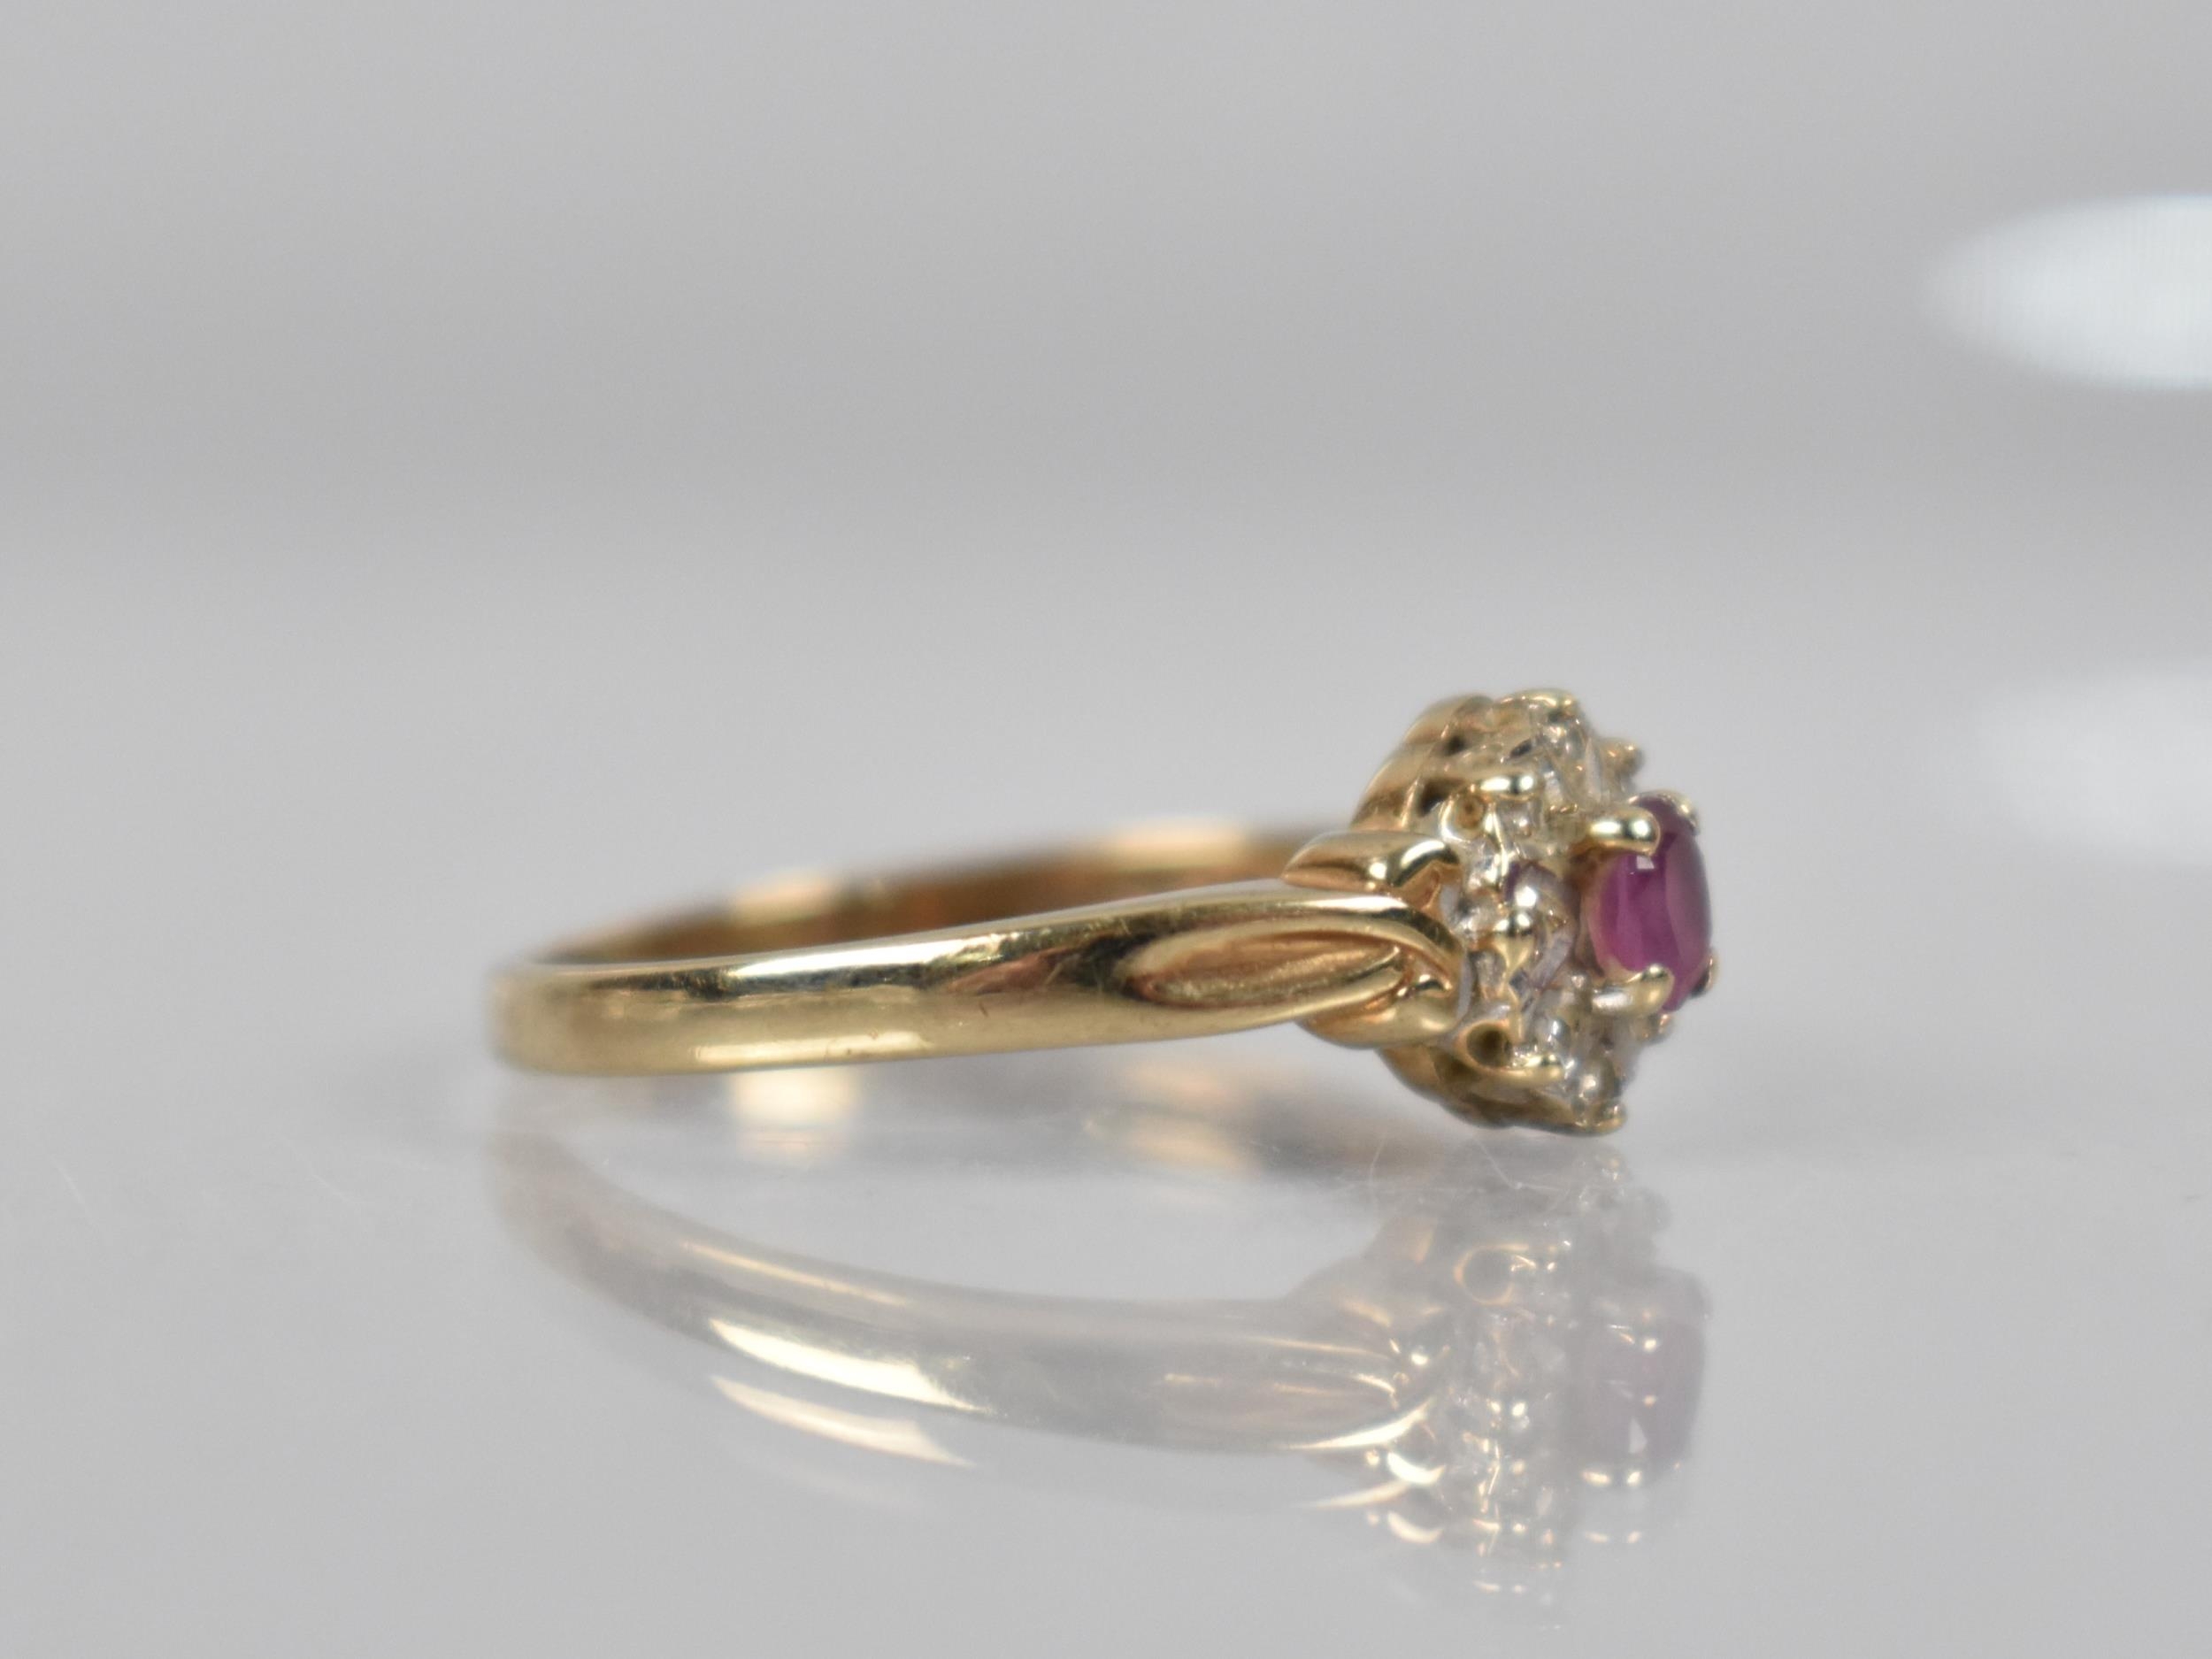 A 9ct Gold, Diamond and Ruby Cluster Ring, Oval Cut Ruby Measuring 3.9mm by 2.8mm Set in Four - Image 2 of 2